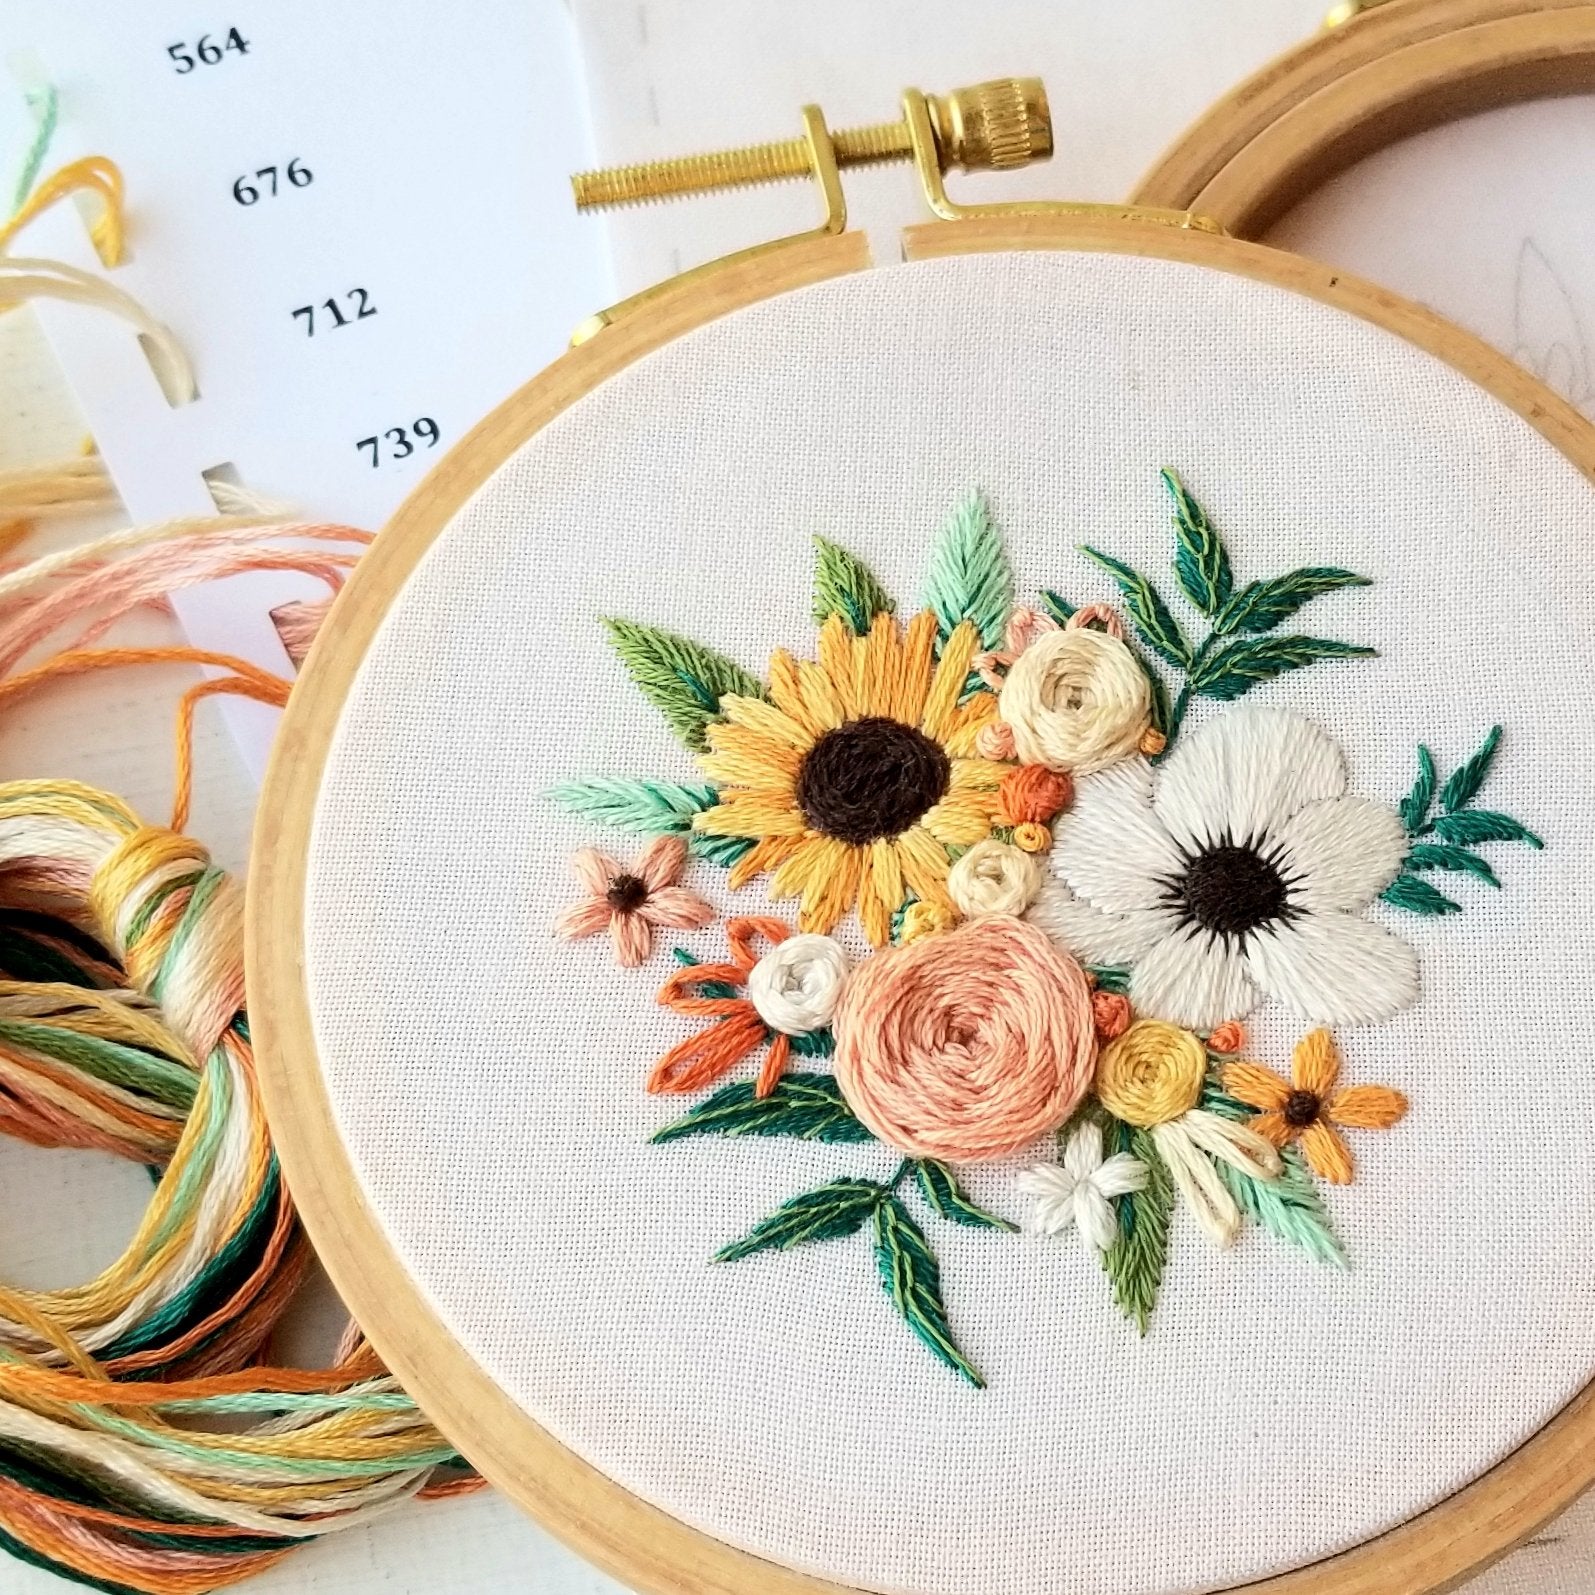 Cozy Harvest Beginner Embroidery Kit - Colorway Arts